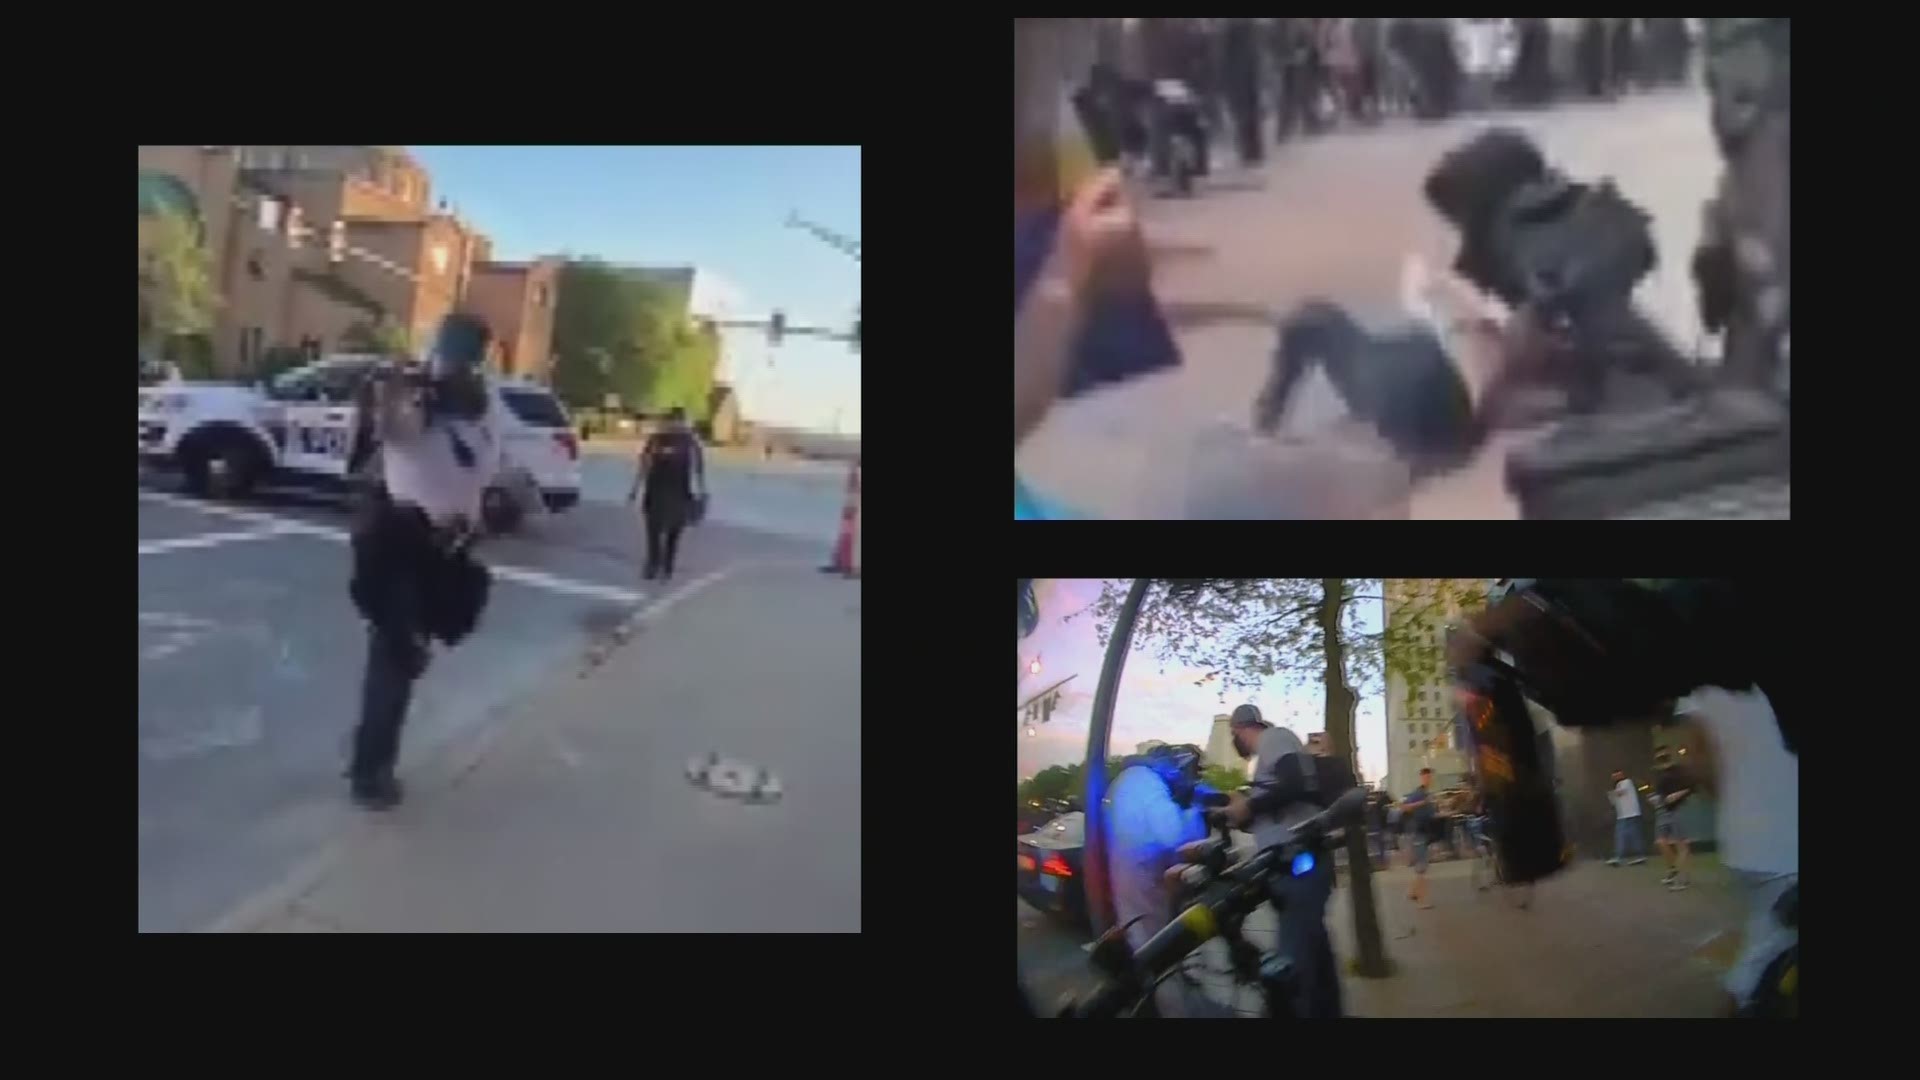 The incidents stem from George Floyd protests in May 2020.